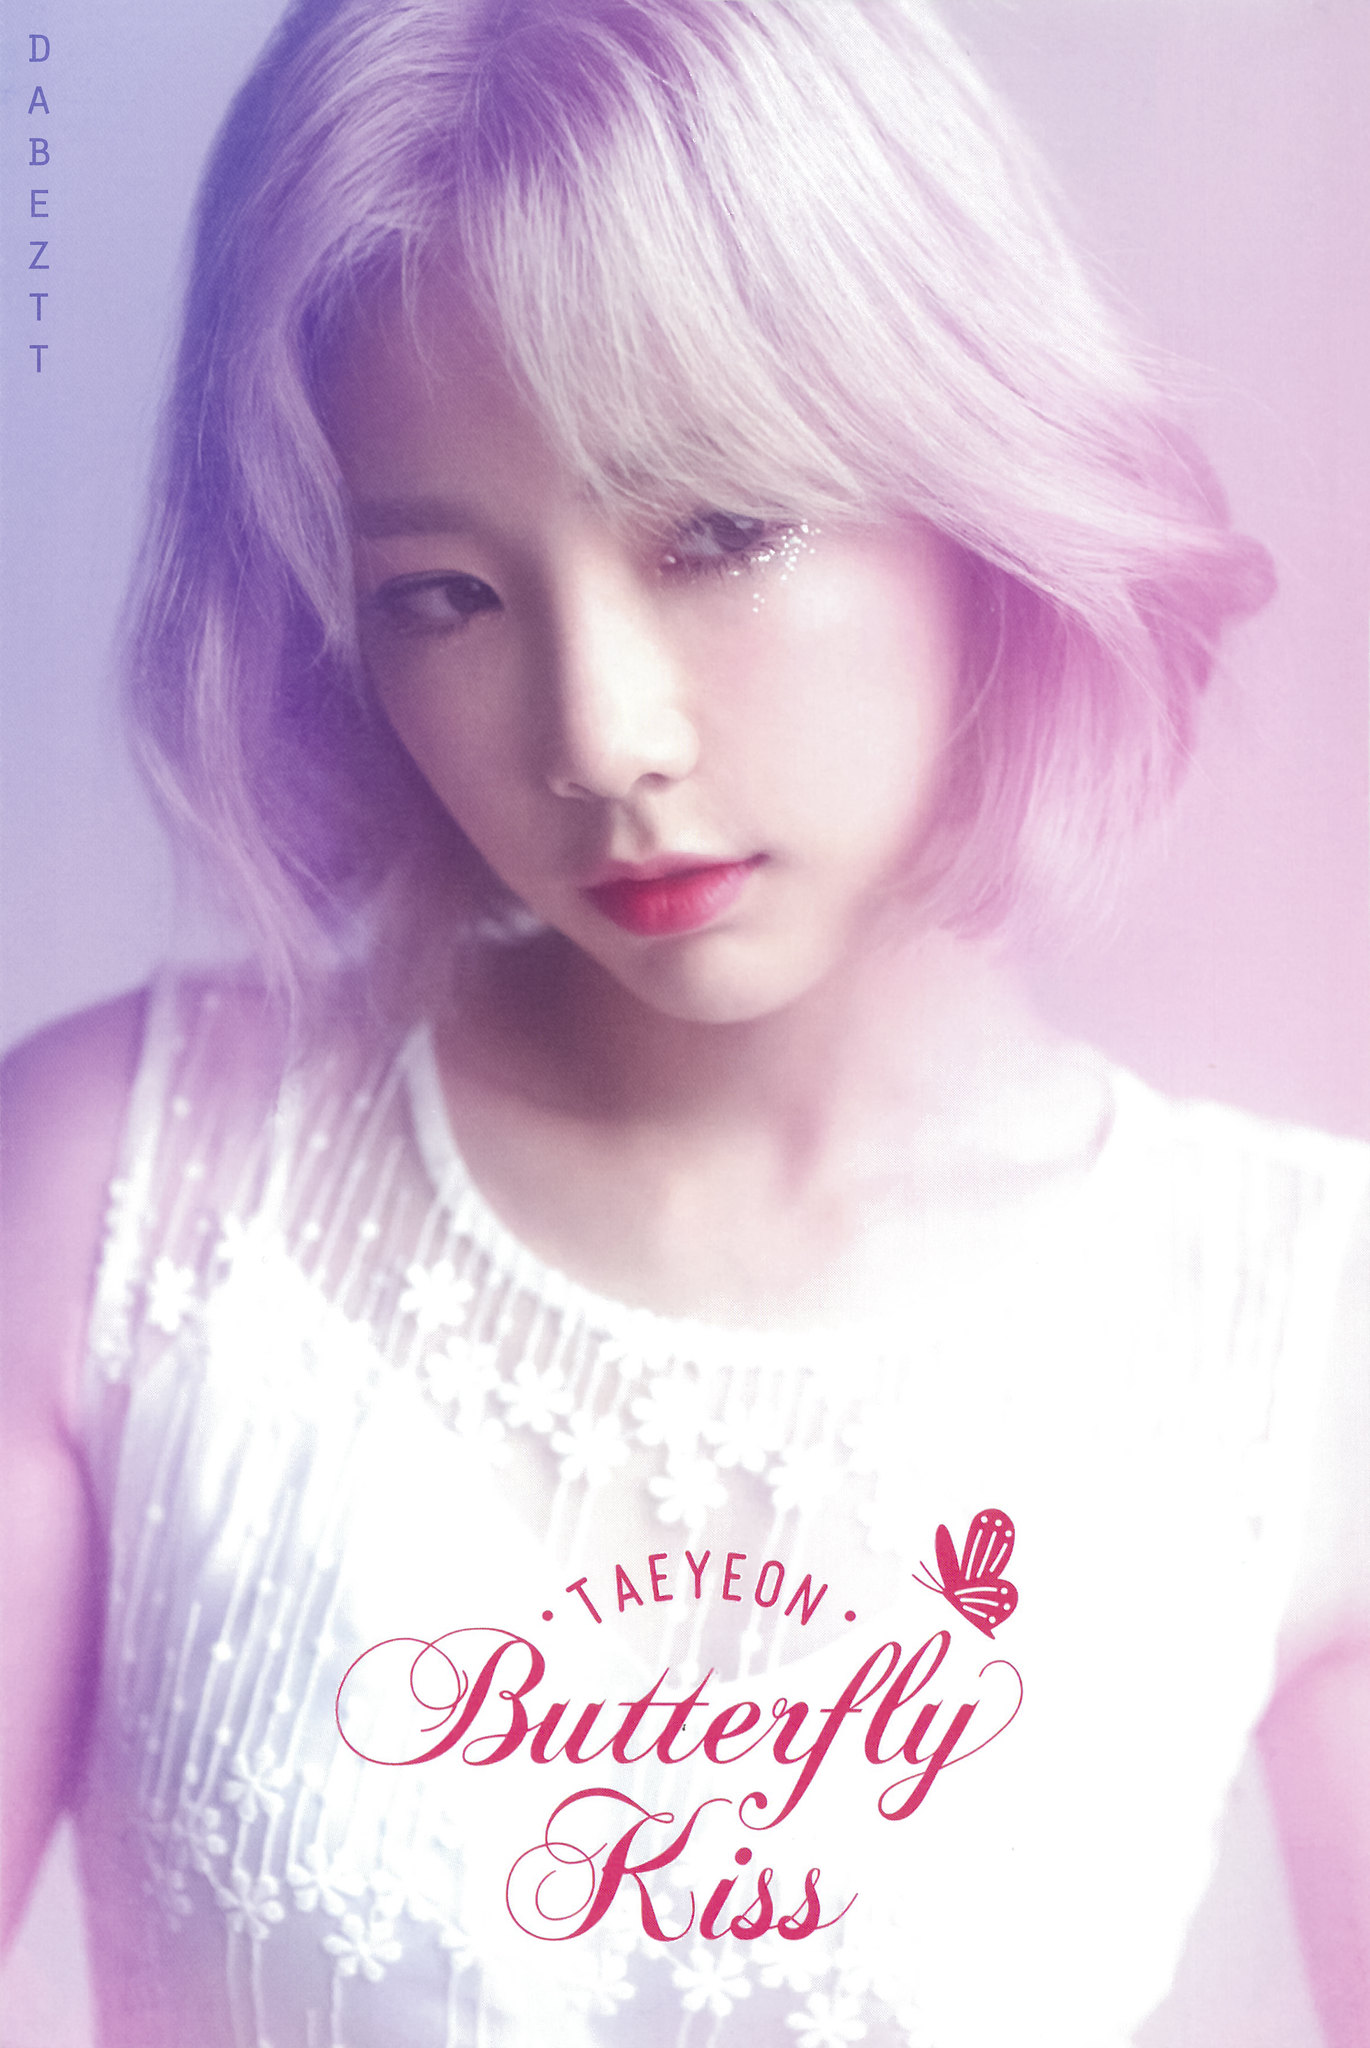 [PIC][24-05-2016]TaeYeon @ Solo Concert “Butterfly Kiss” 28171880102_cfbf03d9d5_k